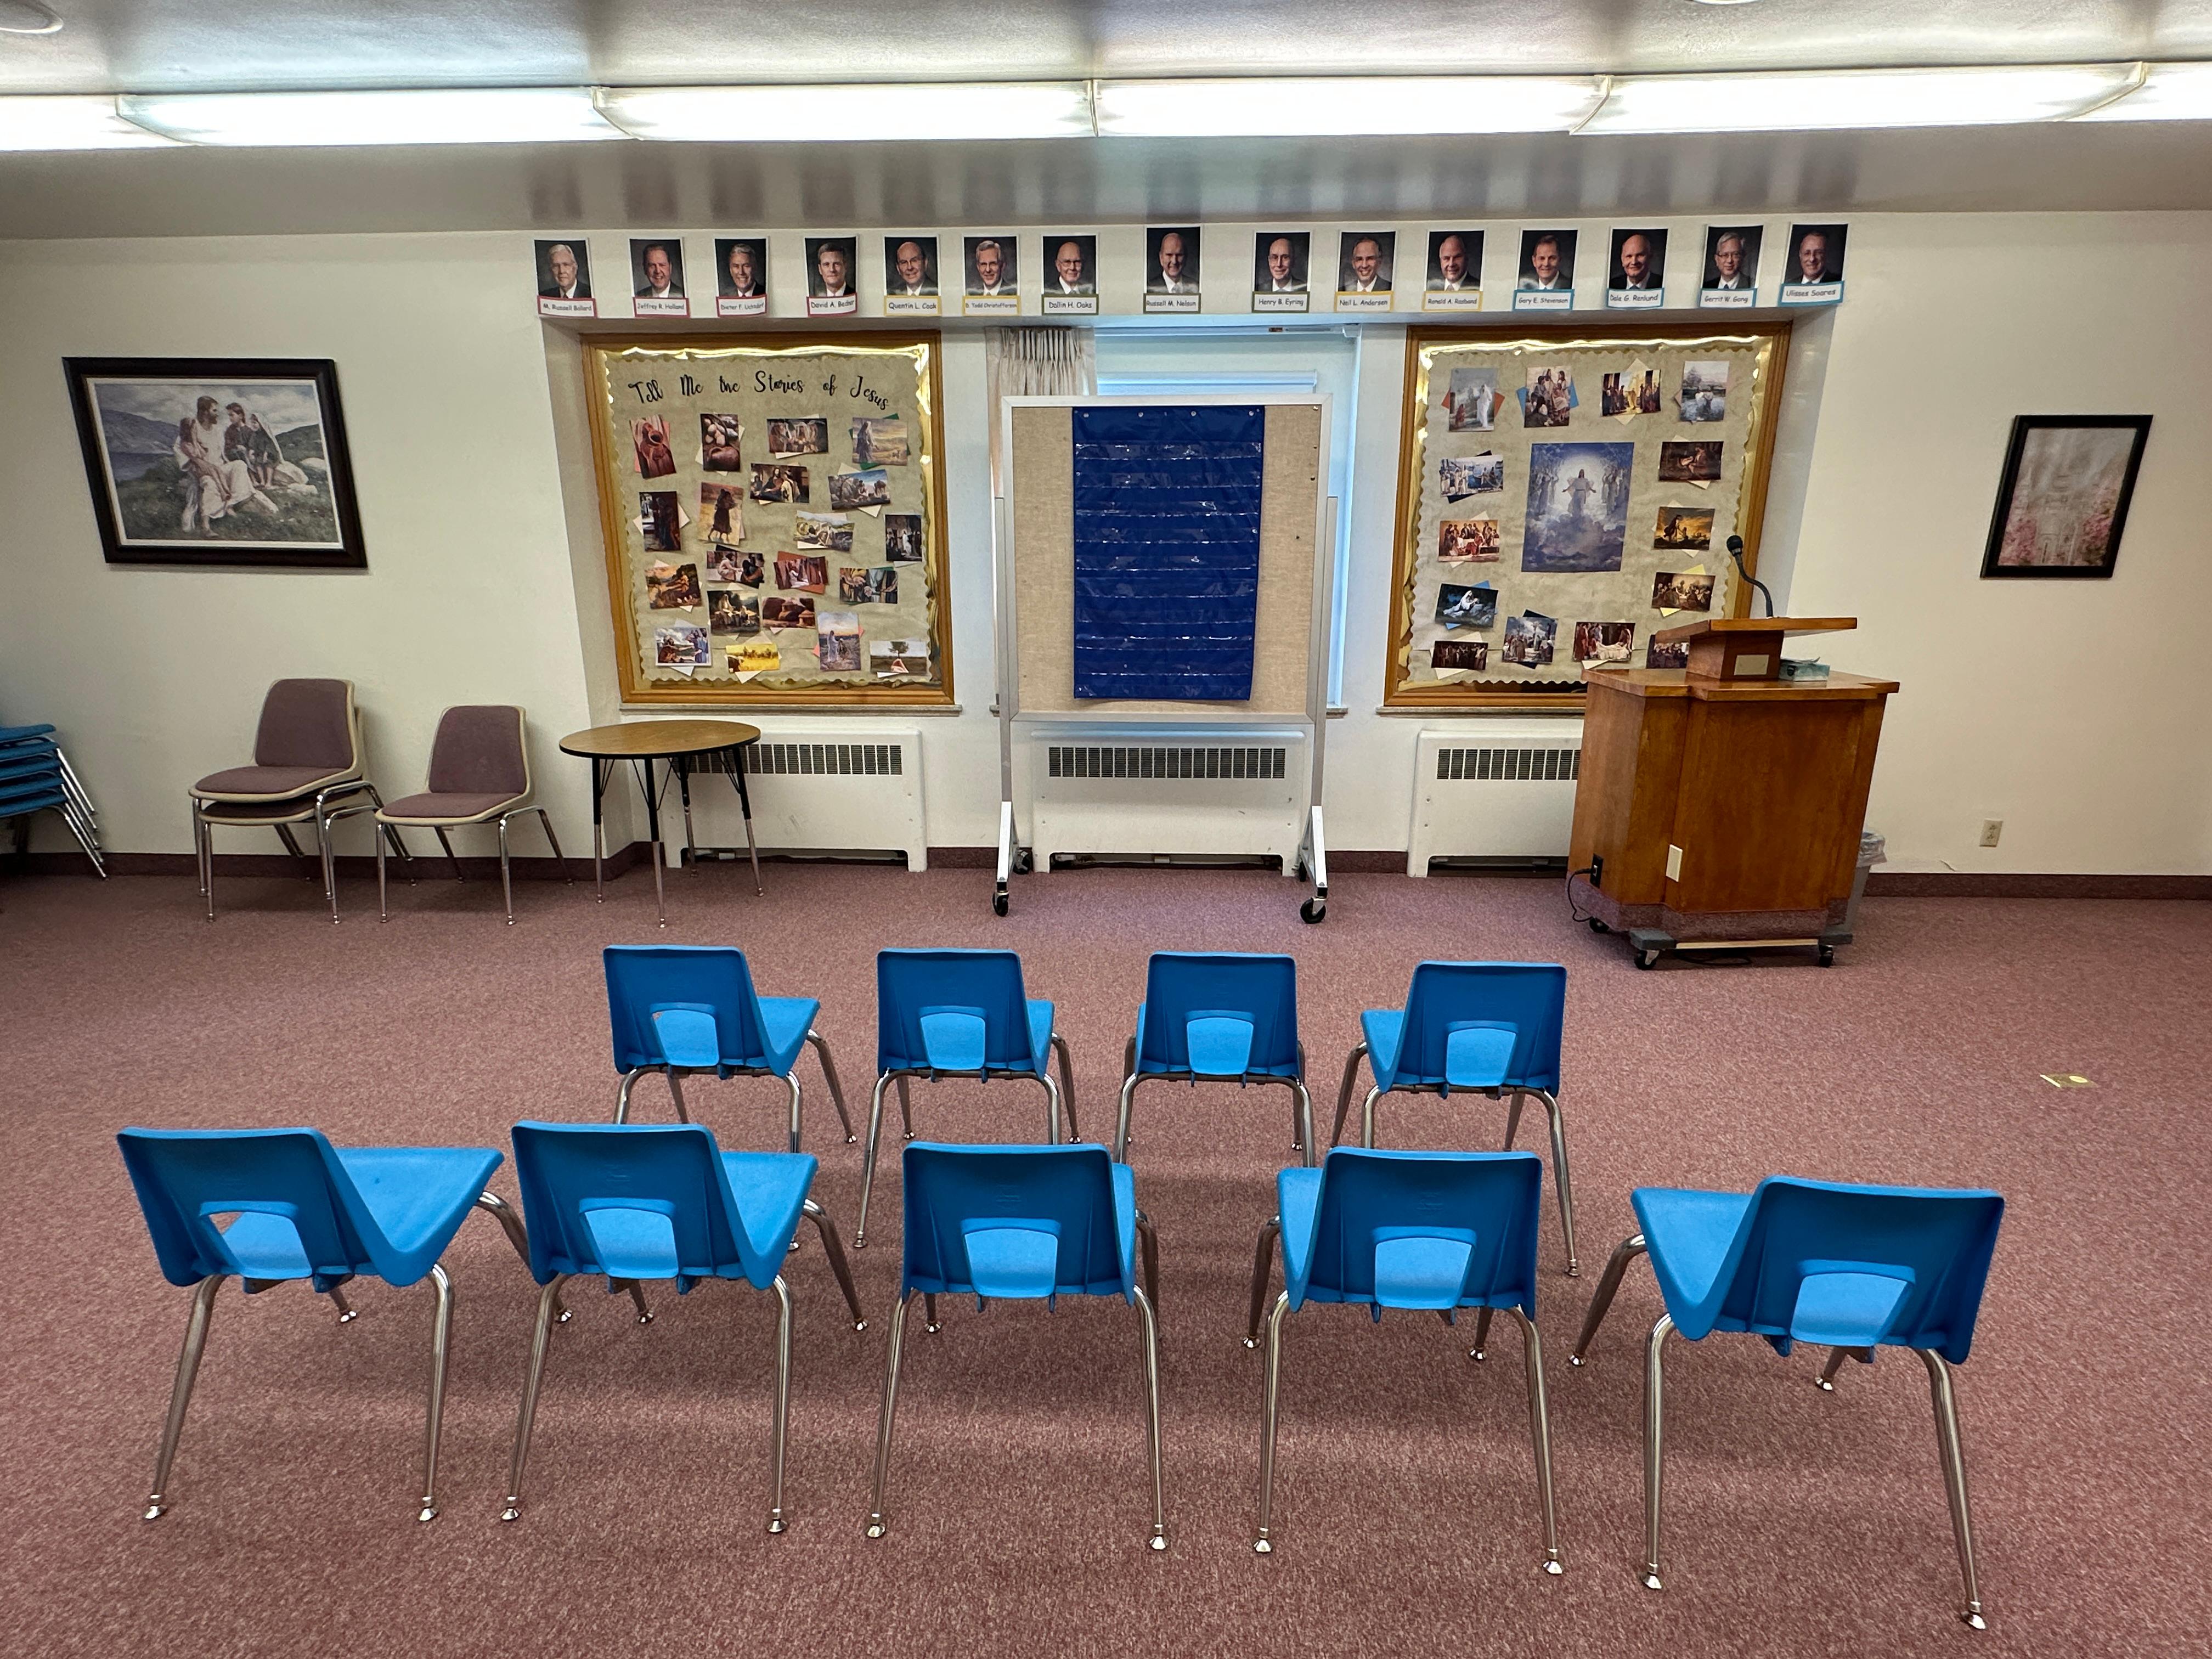 The Primary Room. Children meet here each week to sing and learn about Jesus Christ and His gospel.